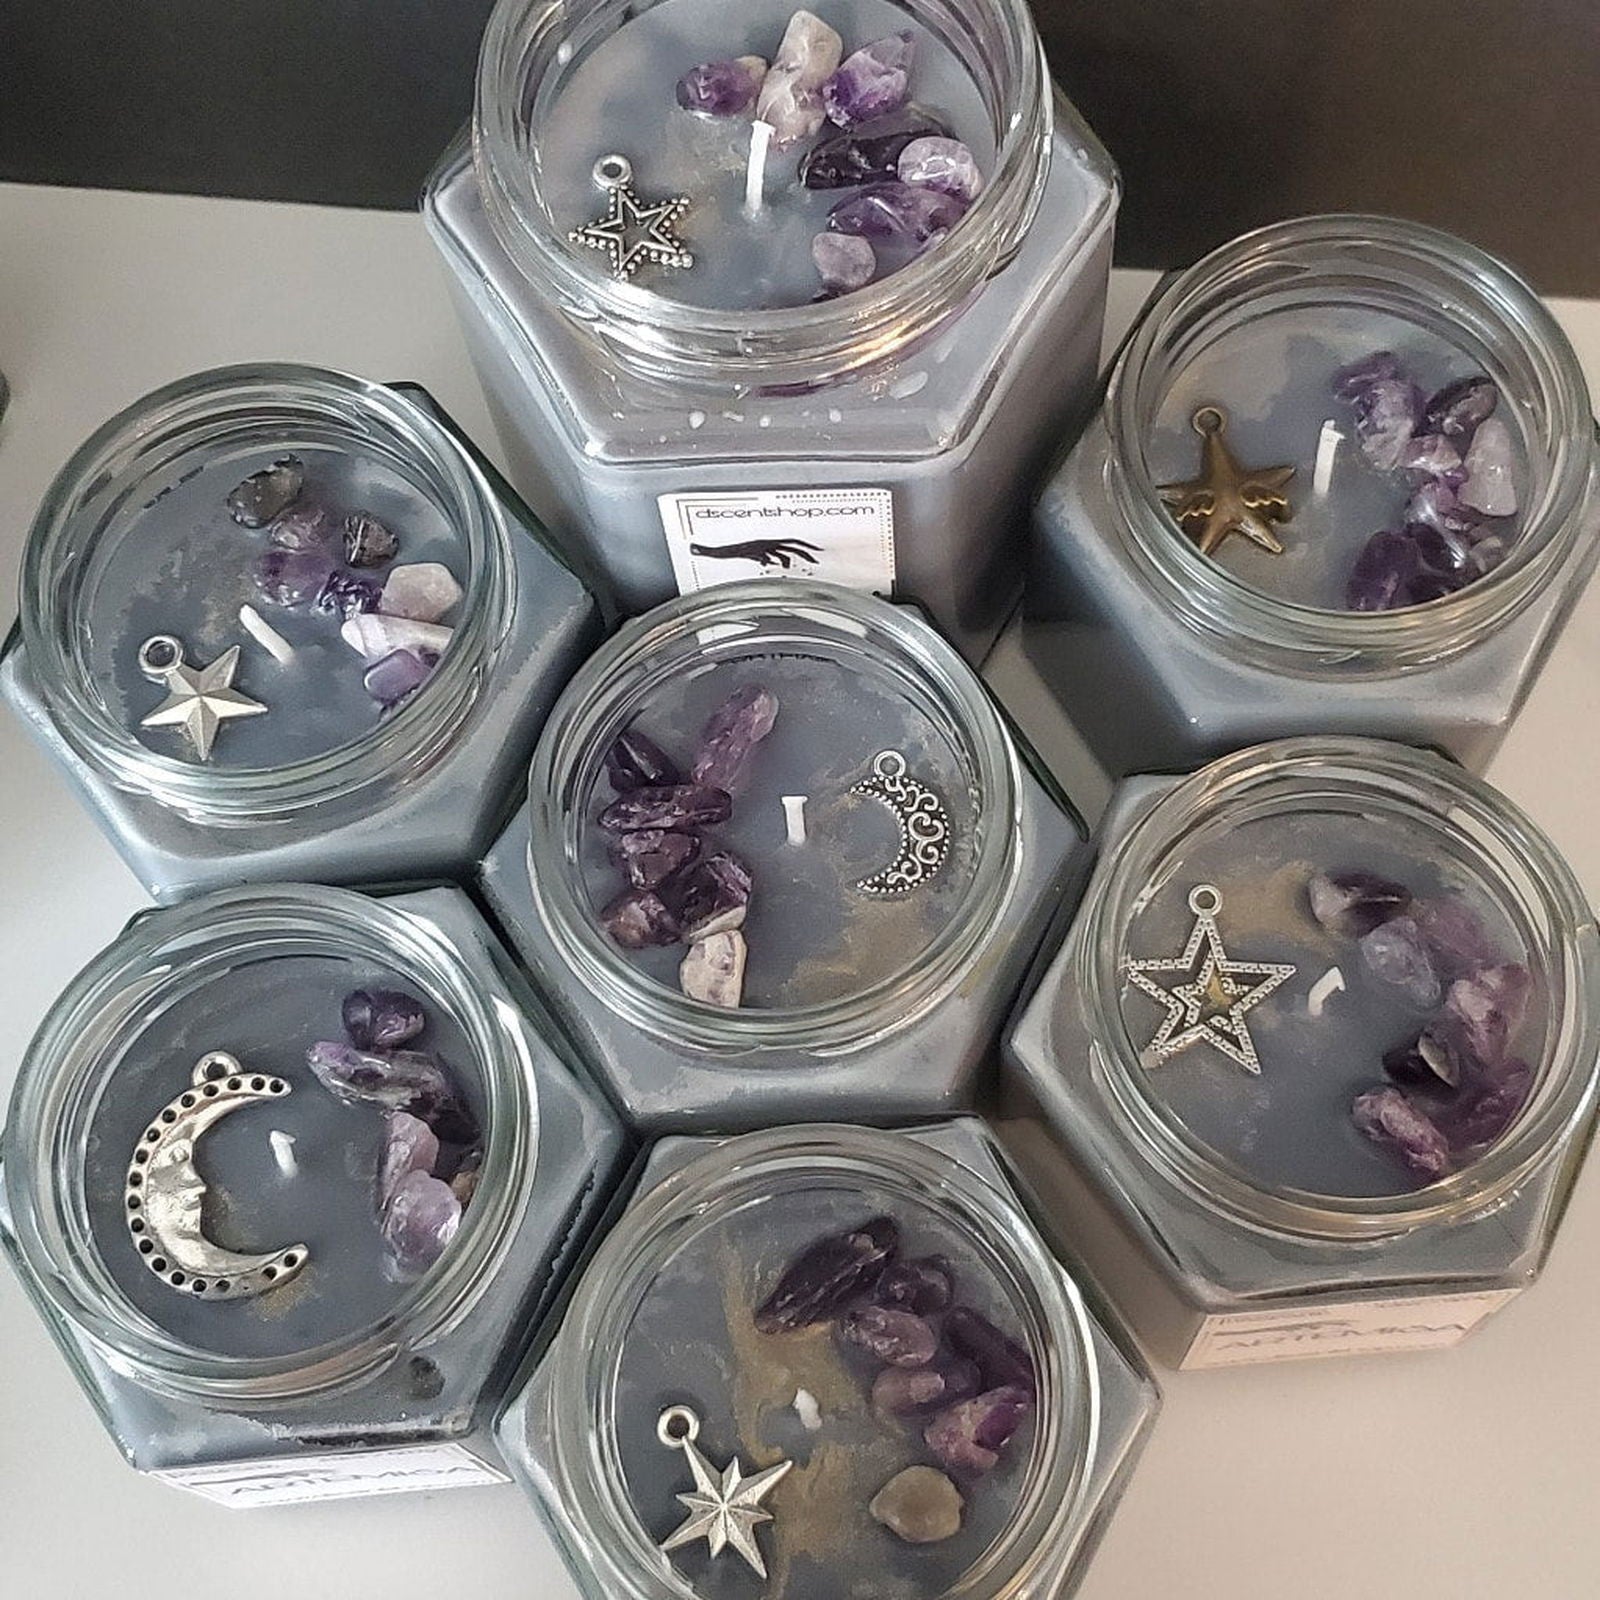 ARTEMISA (Witches Brew) Soy Candle with Amethyst Stones and Charm | Small Hex Jar - D SCENT 